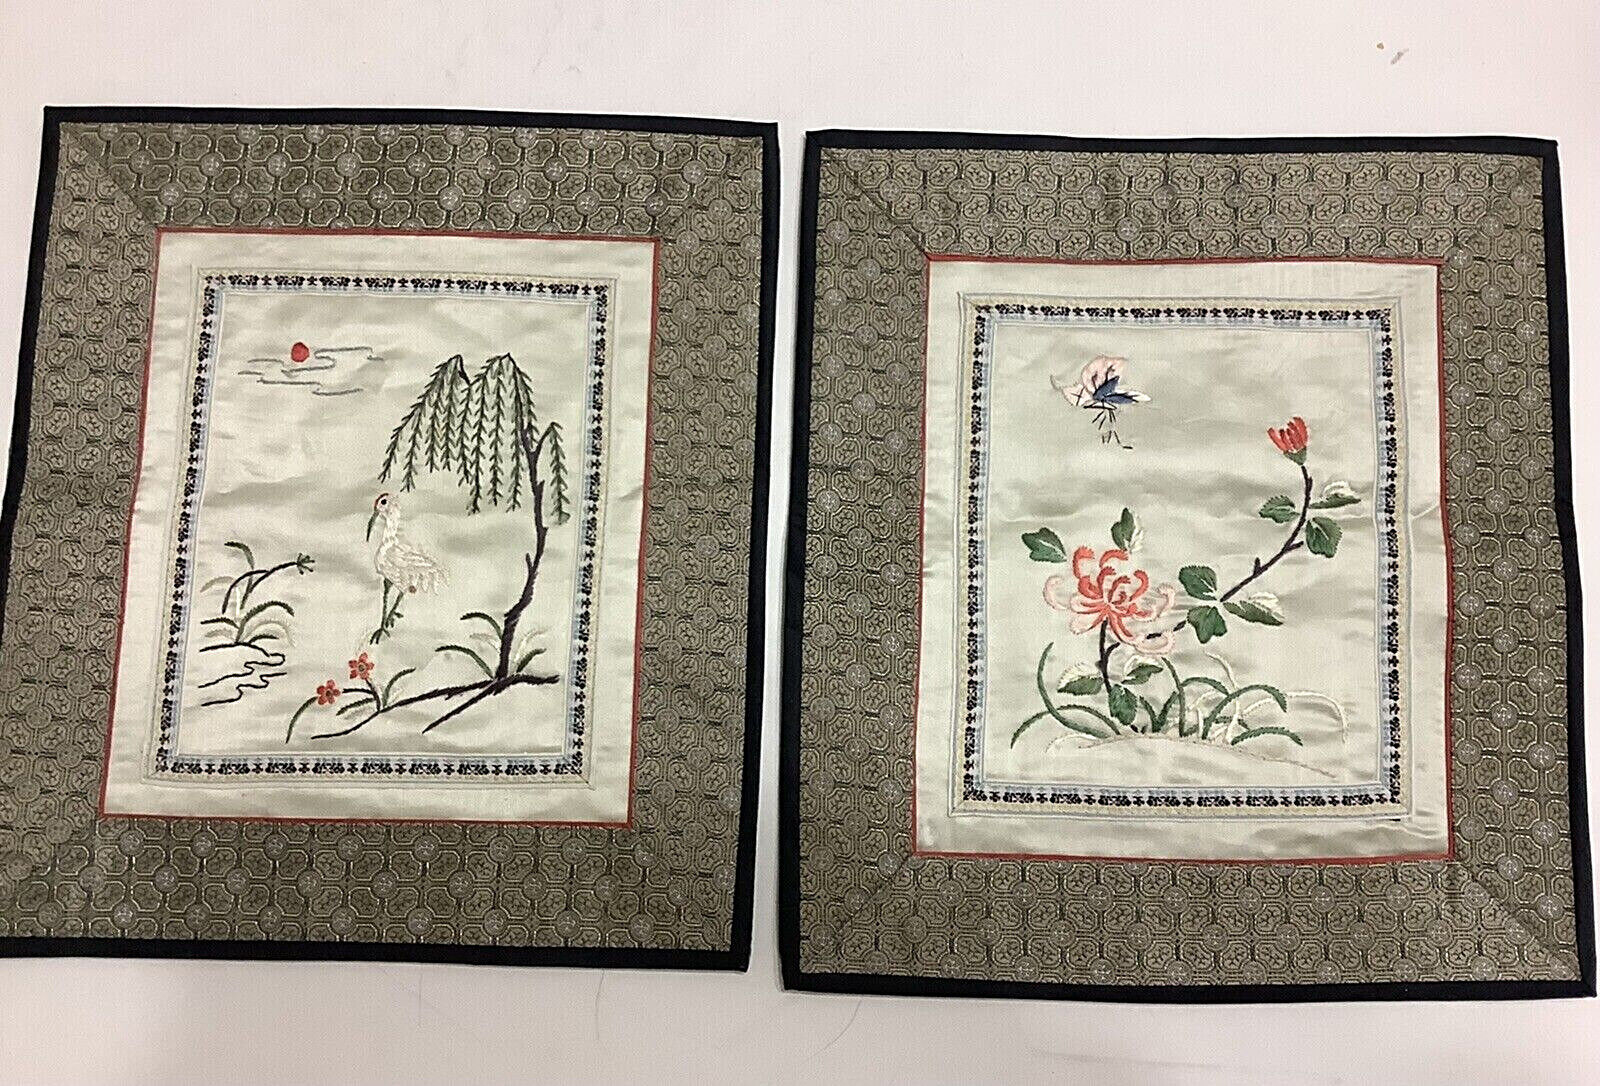 Suzhou Lanli Garden Embroidery Research Institute China 2 Hand Embroider Panels